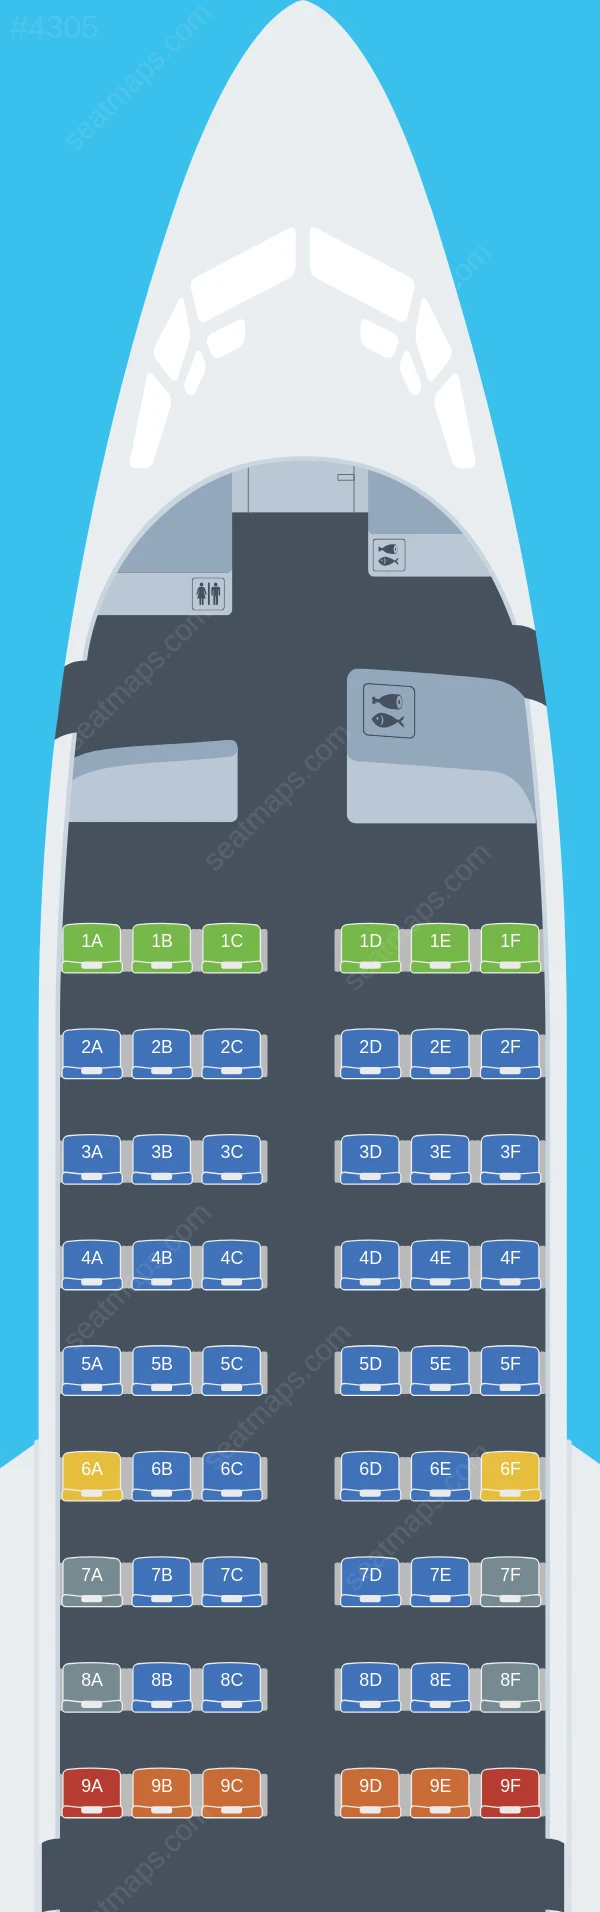 Air North Boeing 737-500 seatmap preview